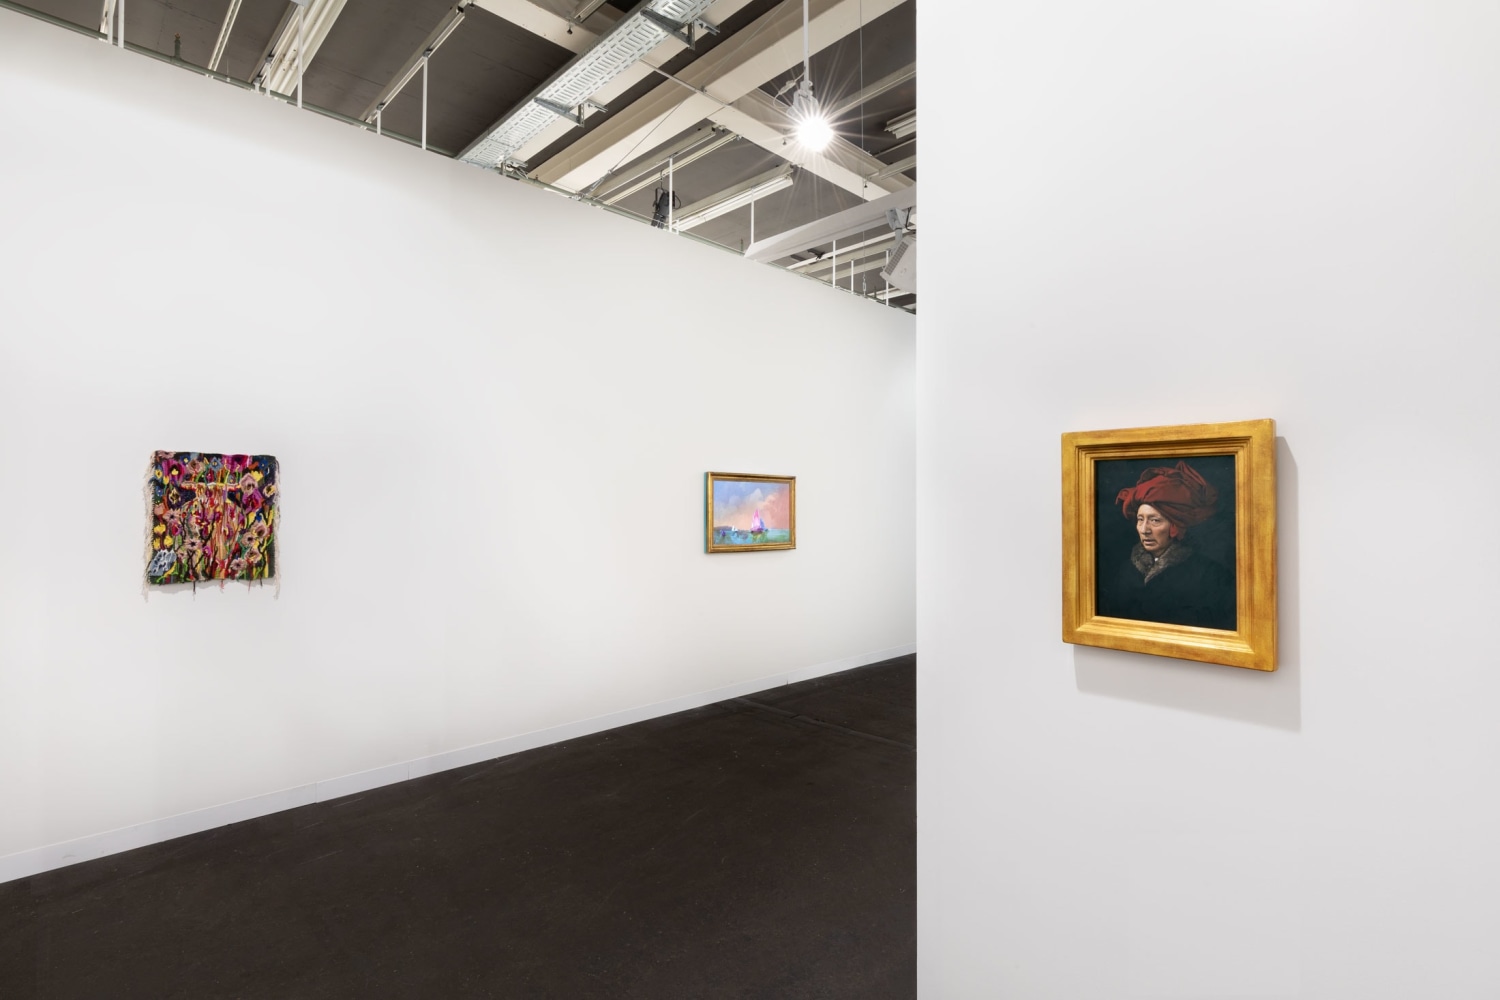 Luhring Augustine

Art Basel, Booth A3

Installation view

2019

Pictured from left: Christina Forrer, Pipilotti Rist, Yasumasa Morimura